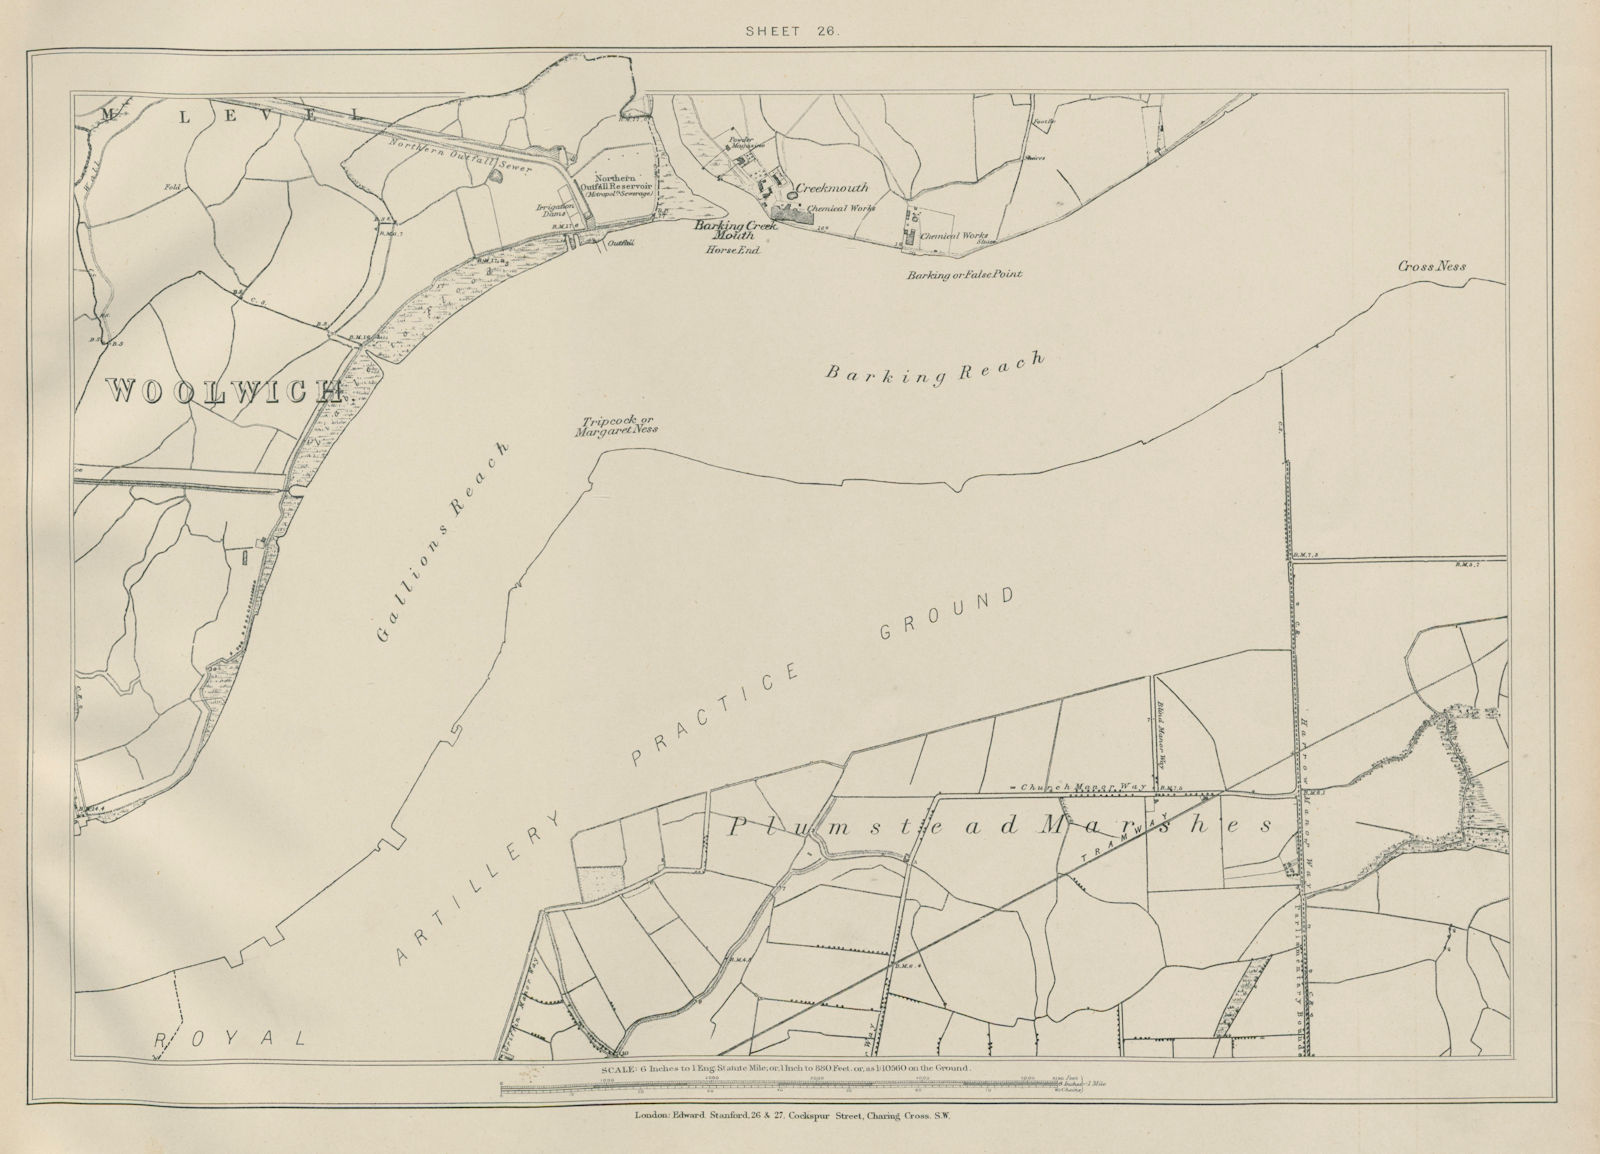 Associate Product Stanford Library map of London Sheet 26 Woolwich Beckton Thamesmead 1895